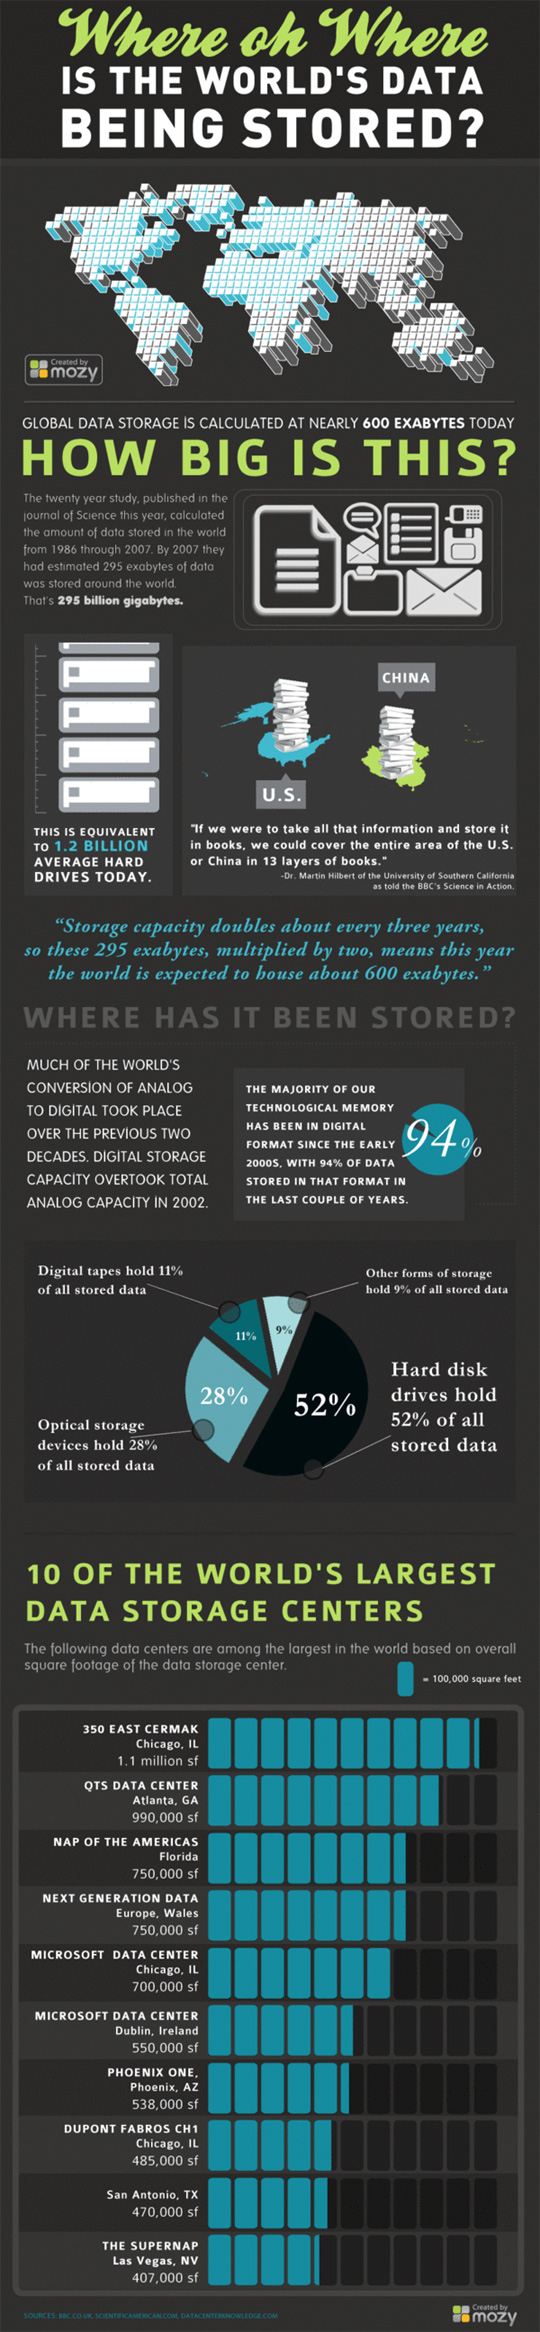 Where Oh Where: Current State Of World's Data Storage (Infographic) 24